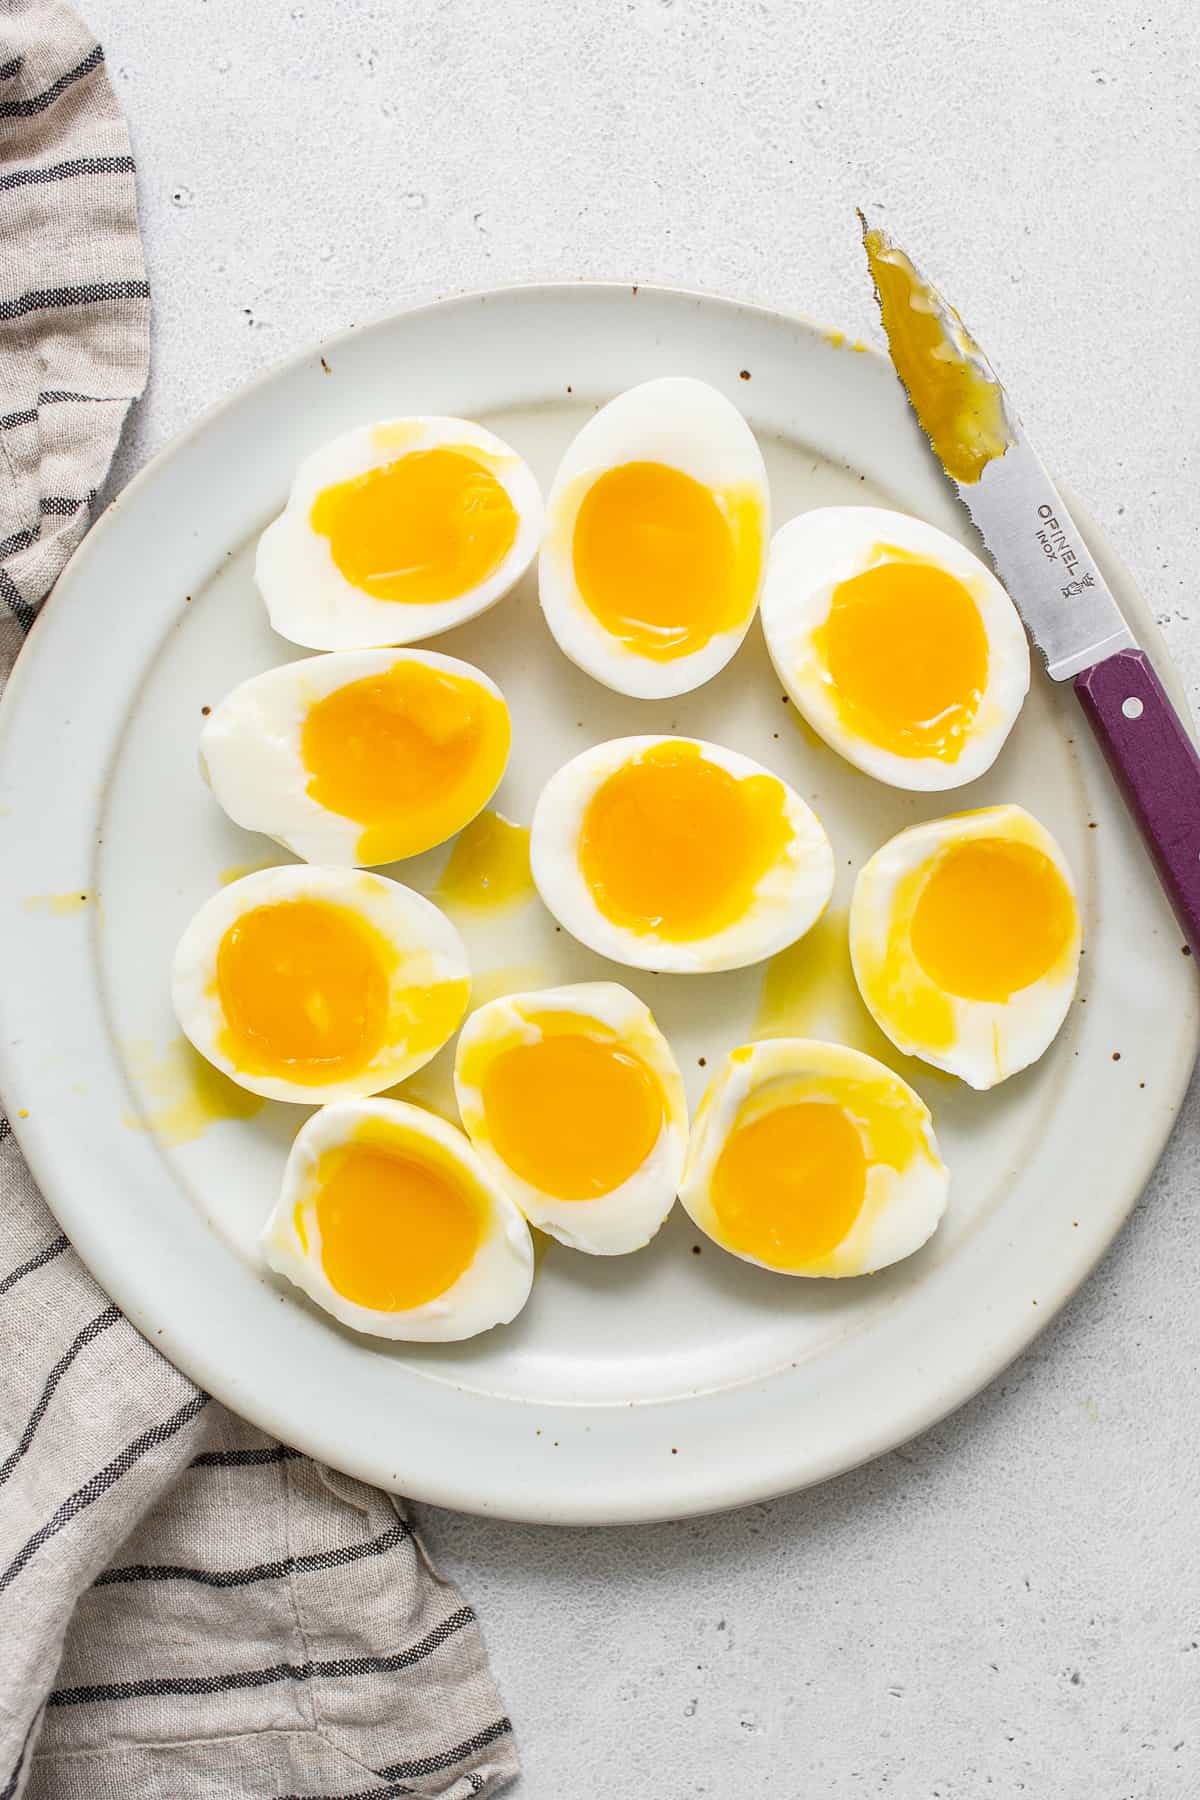 Soft boiled eggs on a plate.